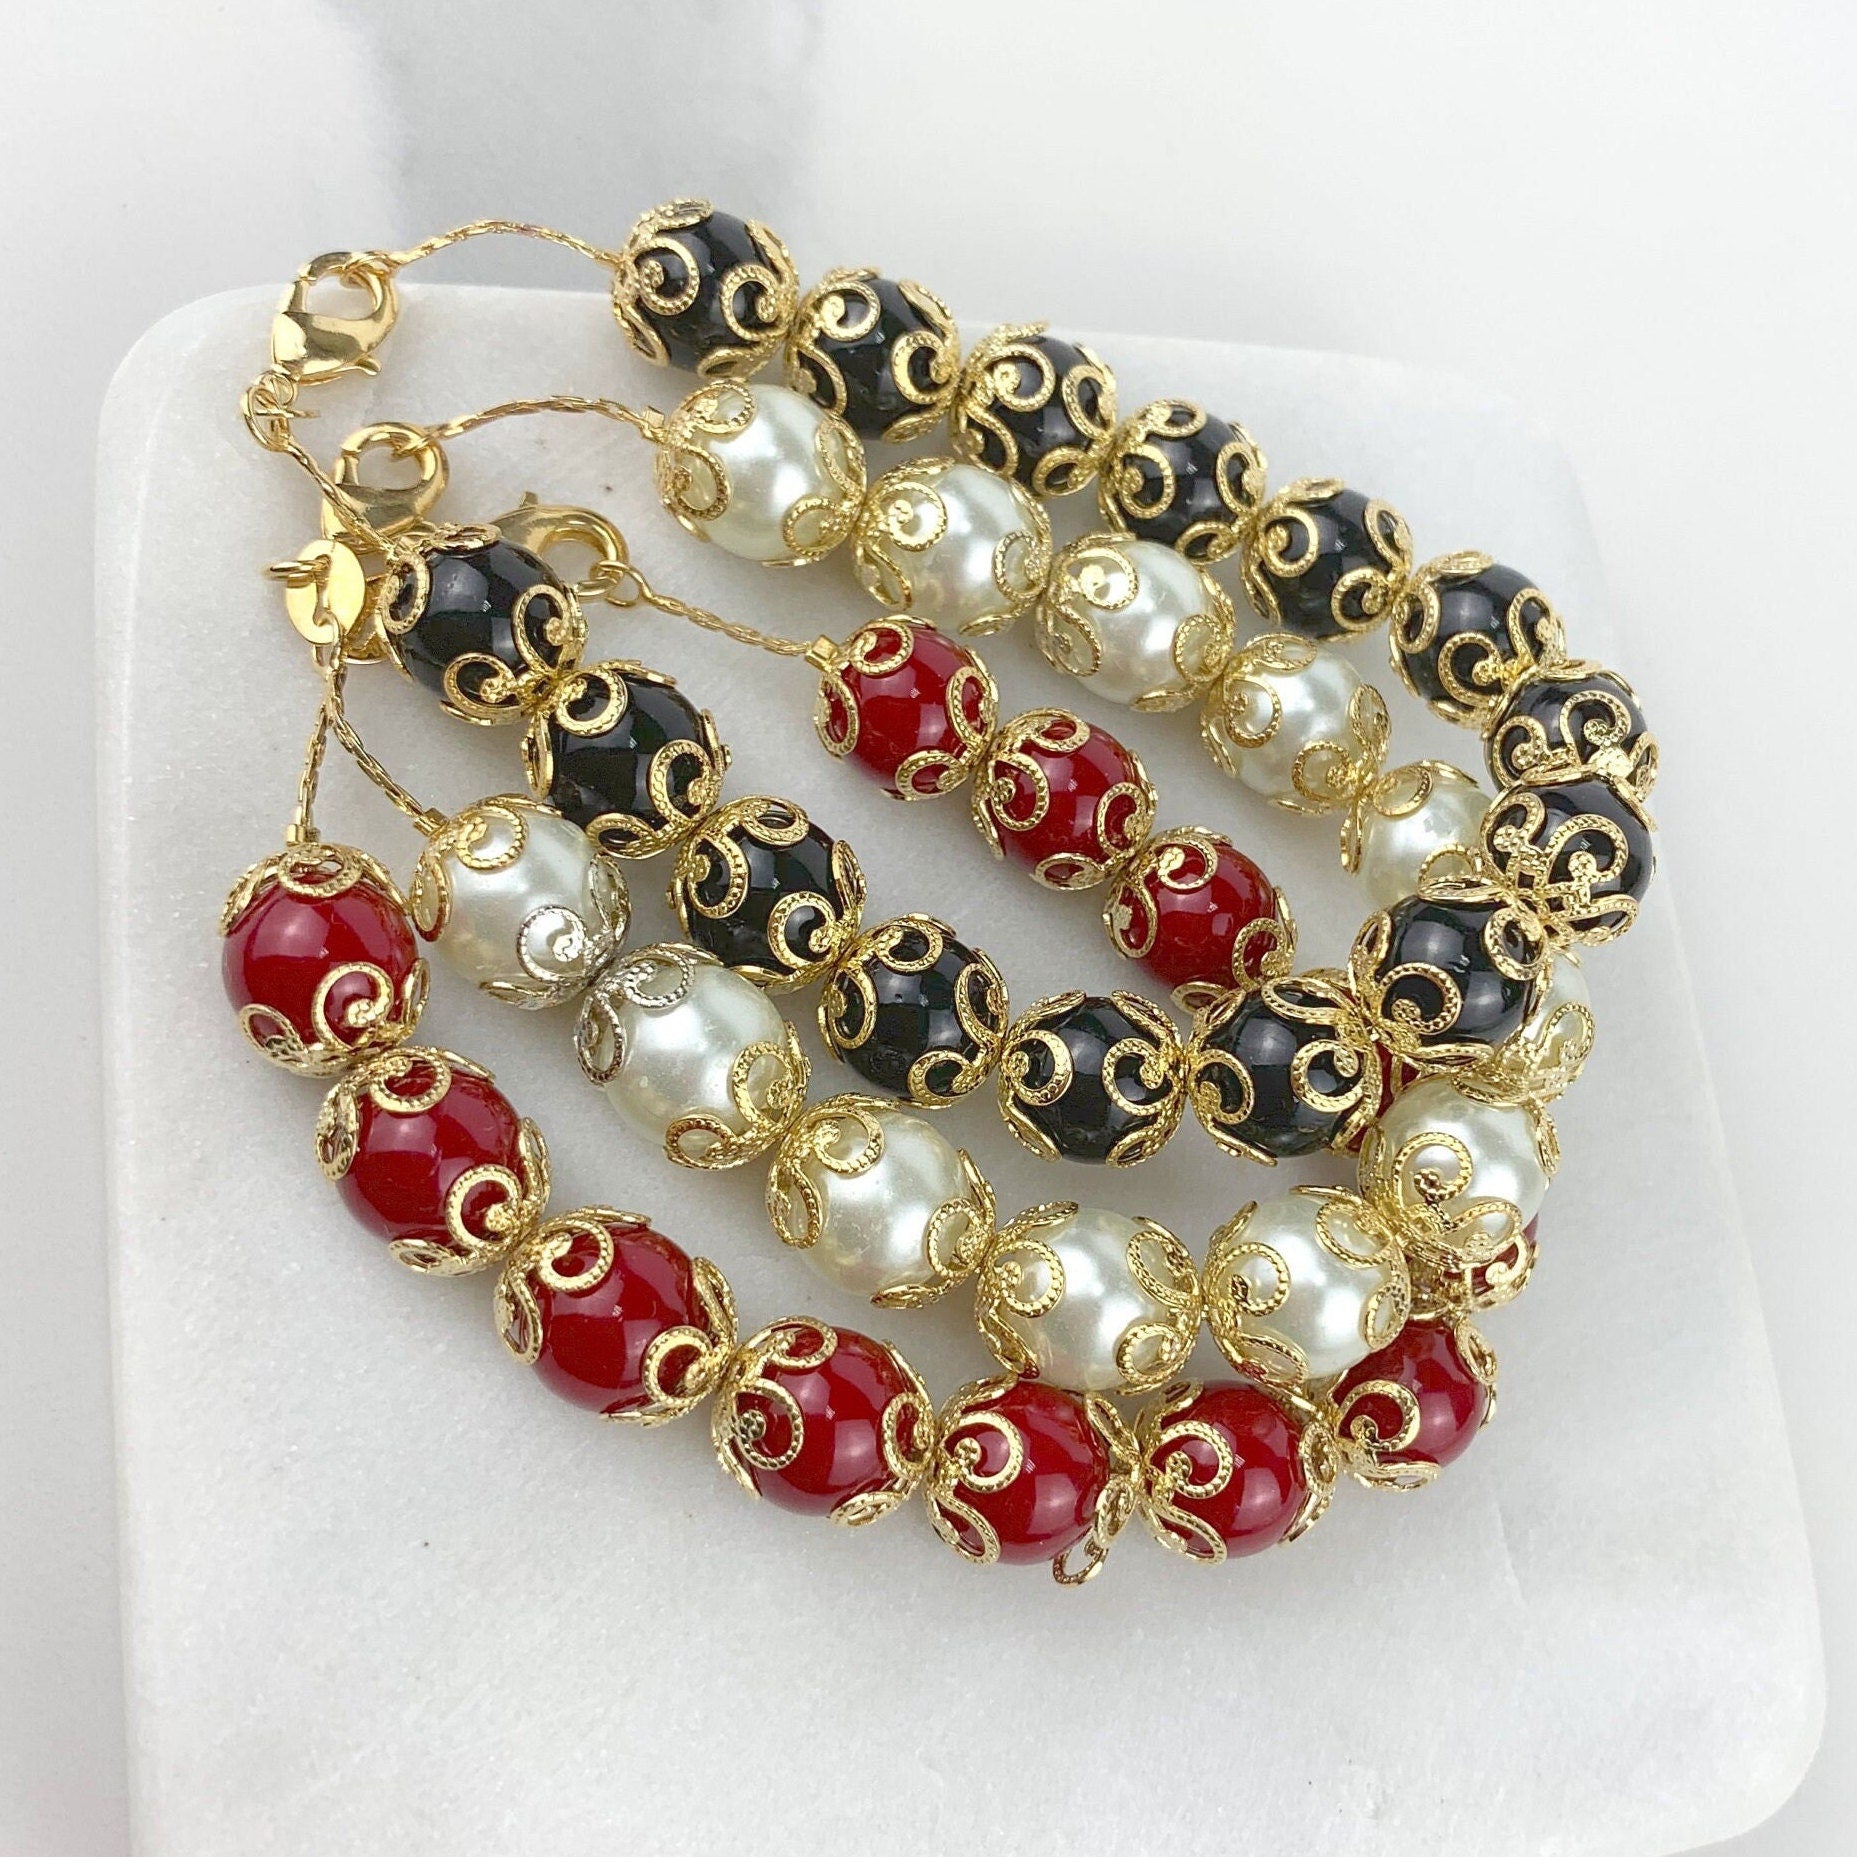 18k Gold Filled Embellished Bead Pearl Bracelet, Black, Pearl or Red, Wholesale Jewelry Making Supplies